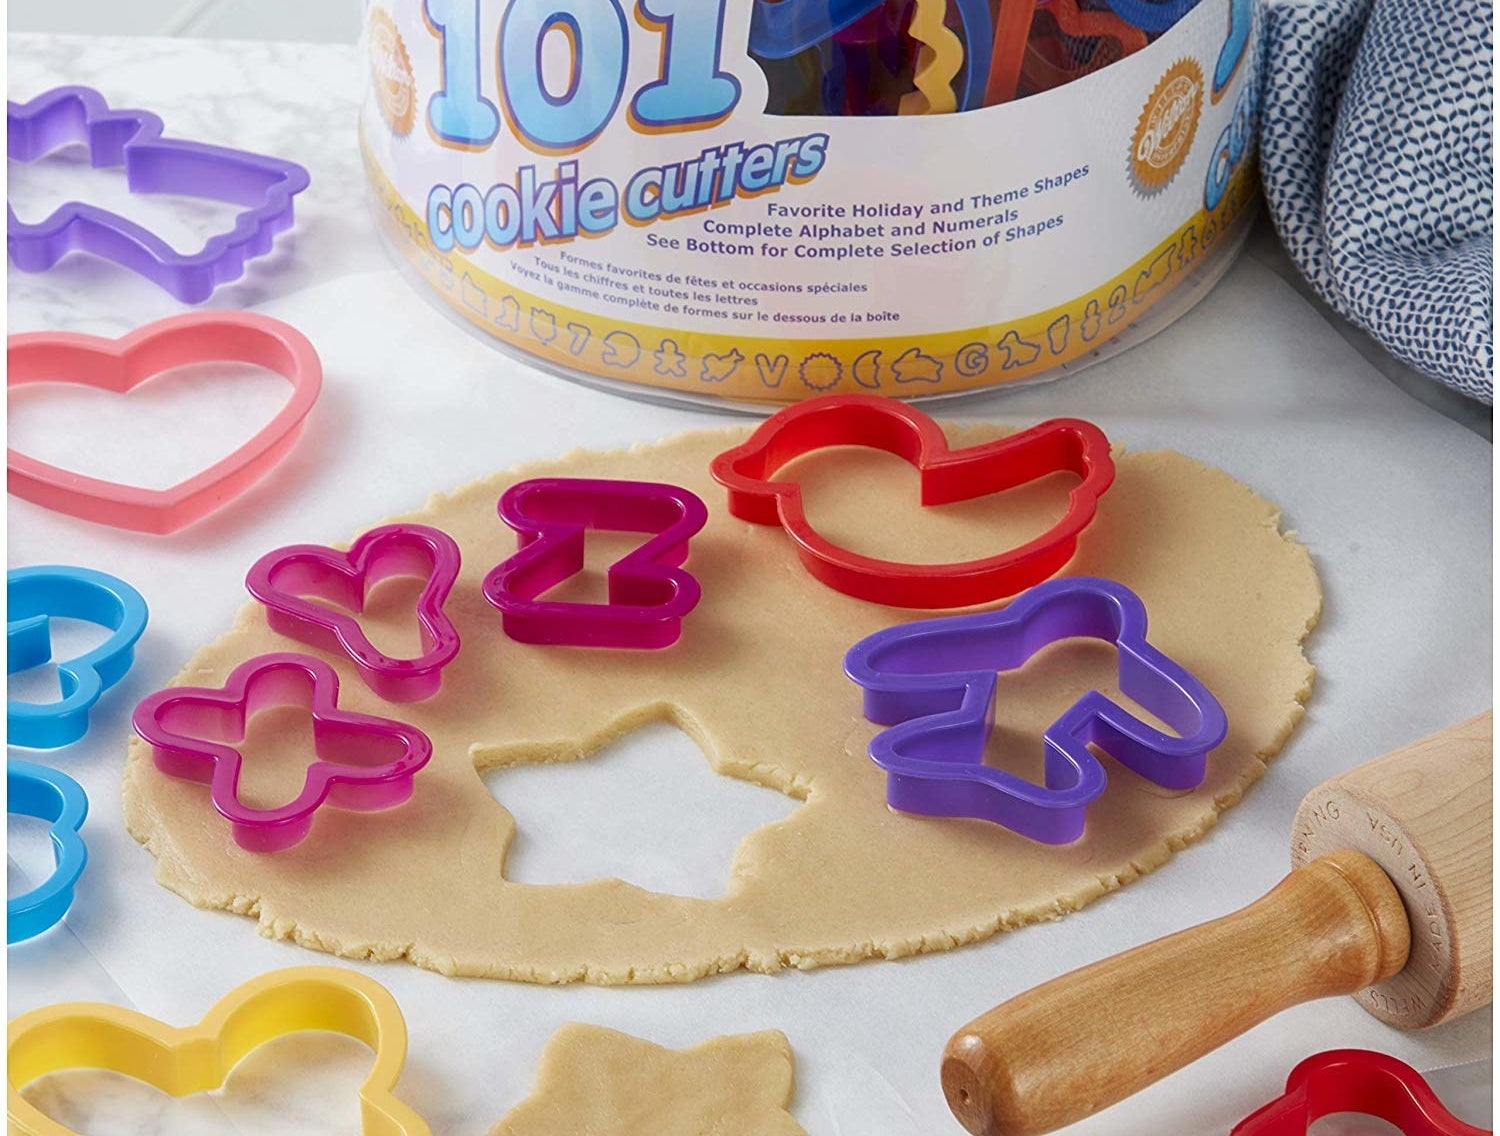 The cookie cutter set